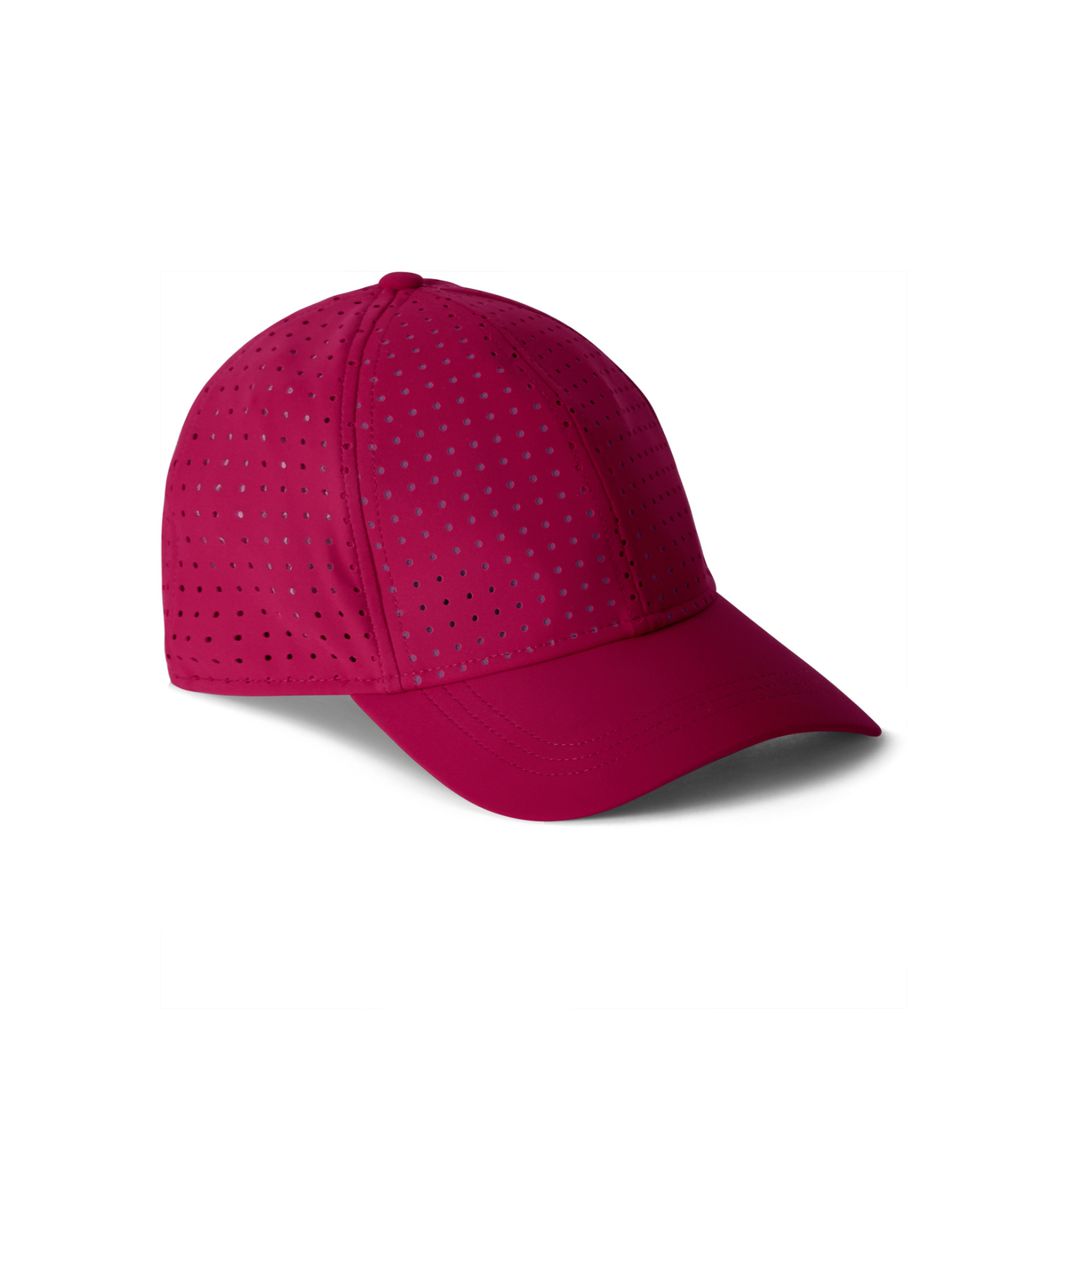 Lululemon Baller Hat (Perforated) - Berry Rumble / Berry Rumble